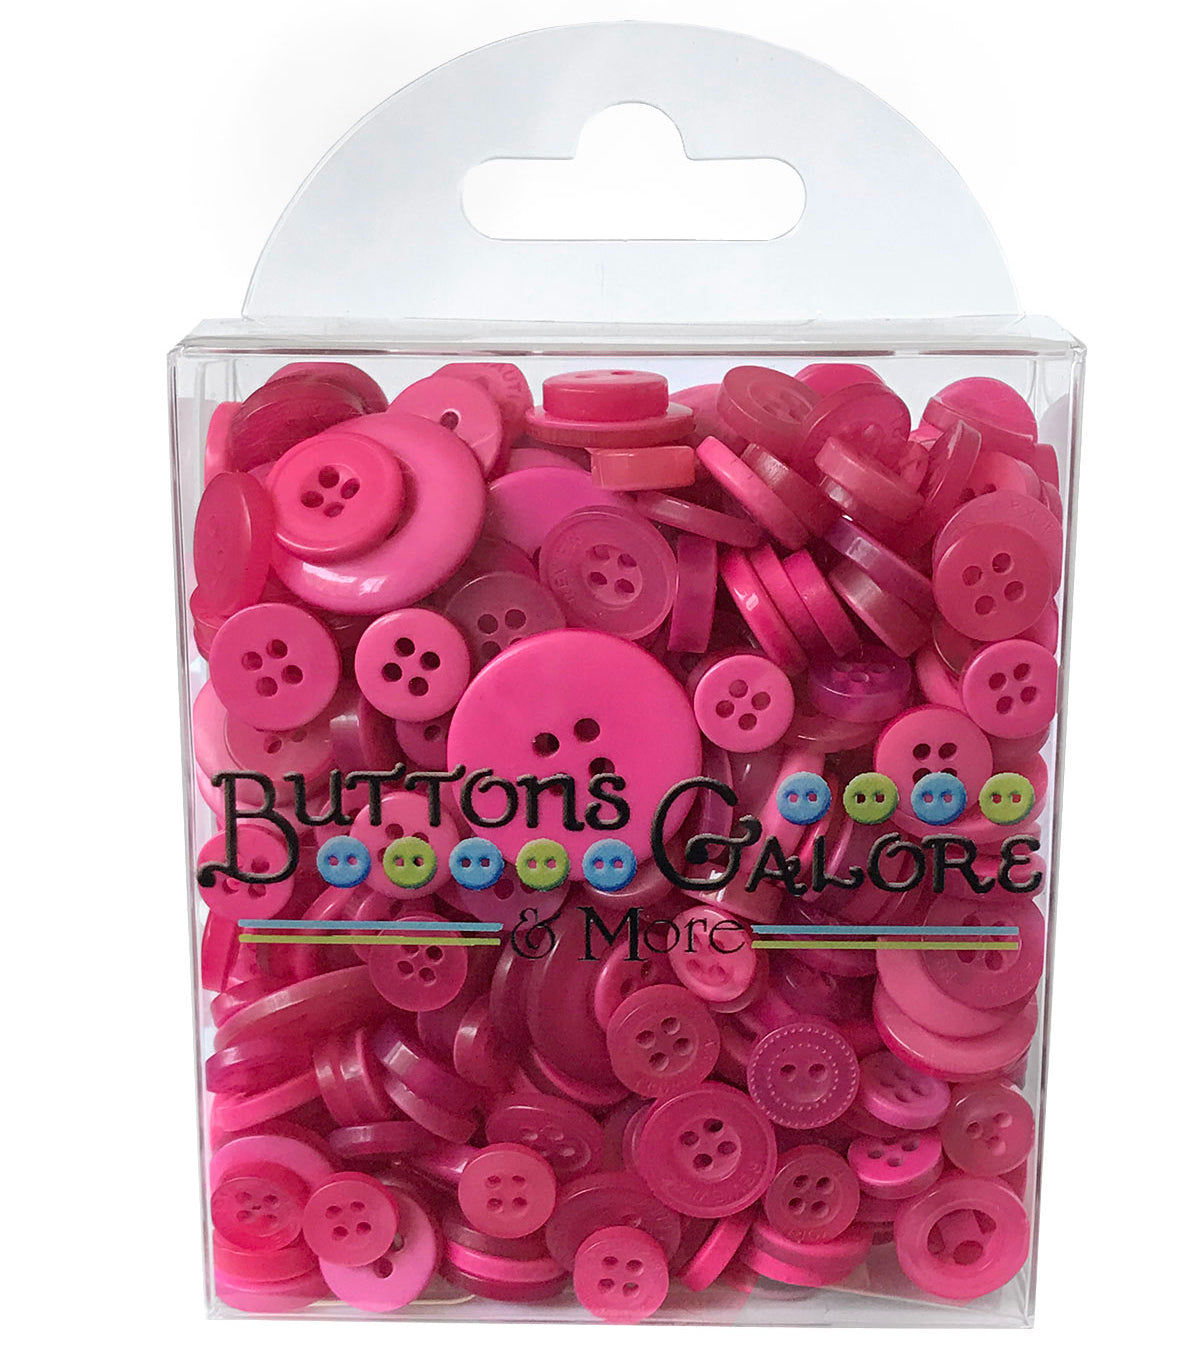 Perzoe Colorful Buttons 80pcs Multiple Sizes Small Great Colorful Sewing Buttons Clothing Accessories, Pink